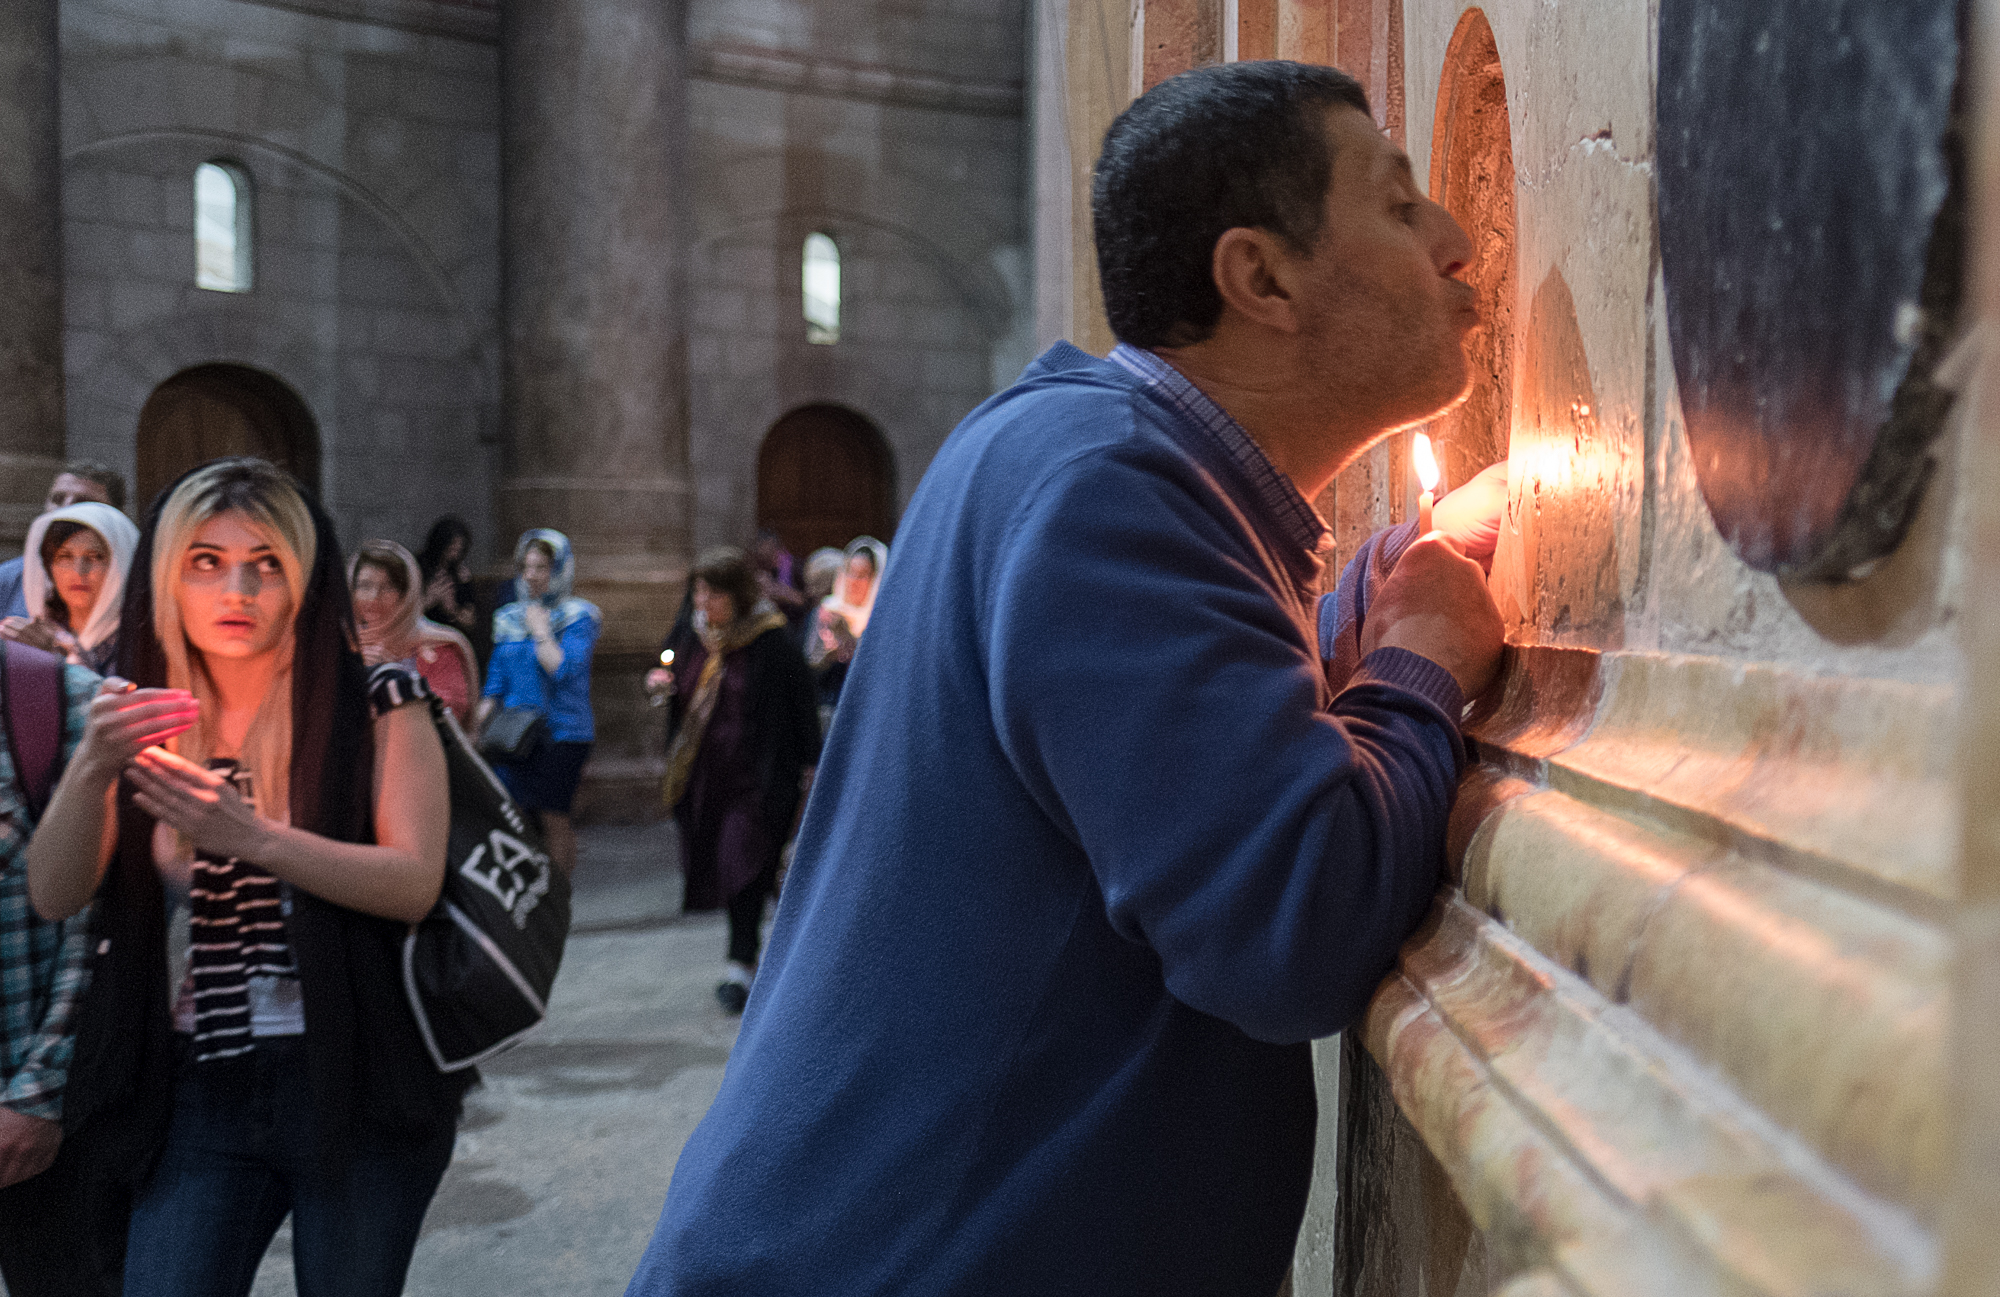 A man stretches to kiss the Edicule, which houses Jesus' tomb within the Church of the Holy Sepulchre.